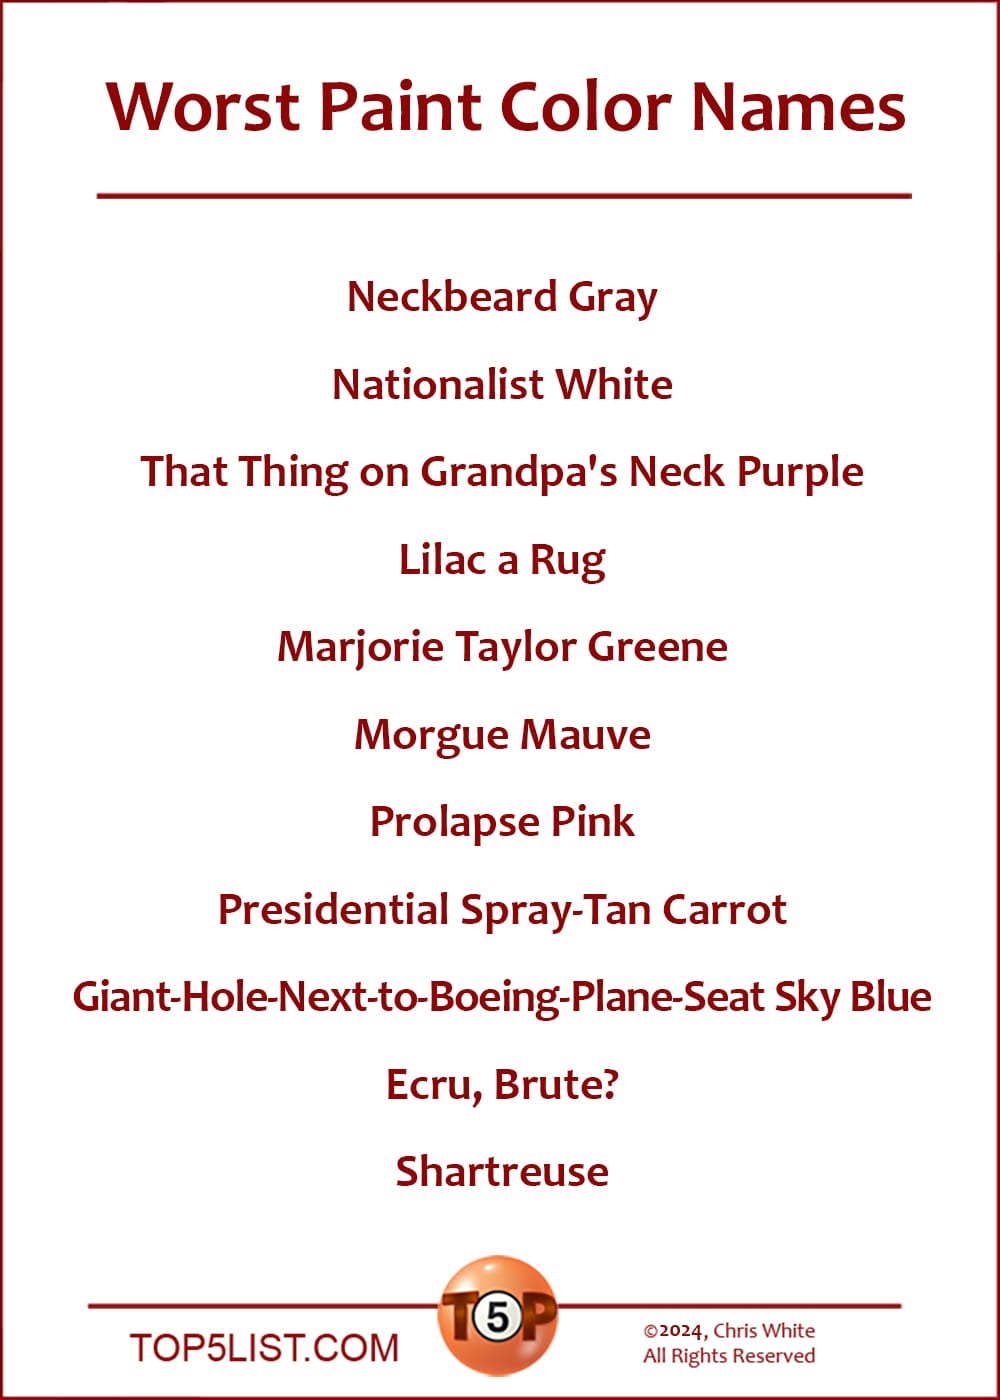 Worst Paint Color Names  |  Neckbeard Gray  Nationalist White  That Thing on Grandpa's Neck Purple  Lilac a Rug  Marjorie Taylor Greene  Morgue Mauve  Prolapse Pink  Presidential Spray-Tan Carrot  Giant-Hole-Next-to-Boeing-Plane-Seat Sky Blue  Ecru, Brute?  Shartreuse